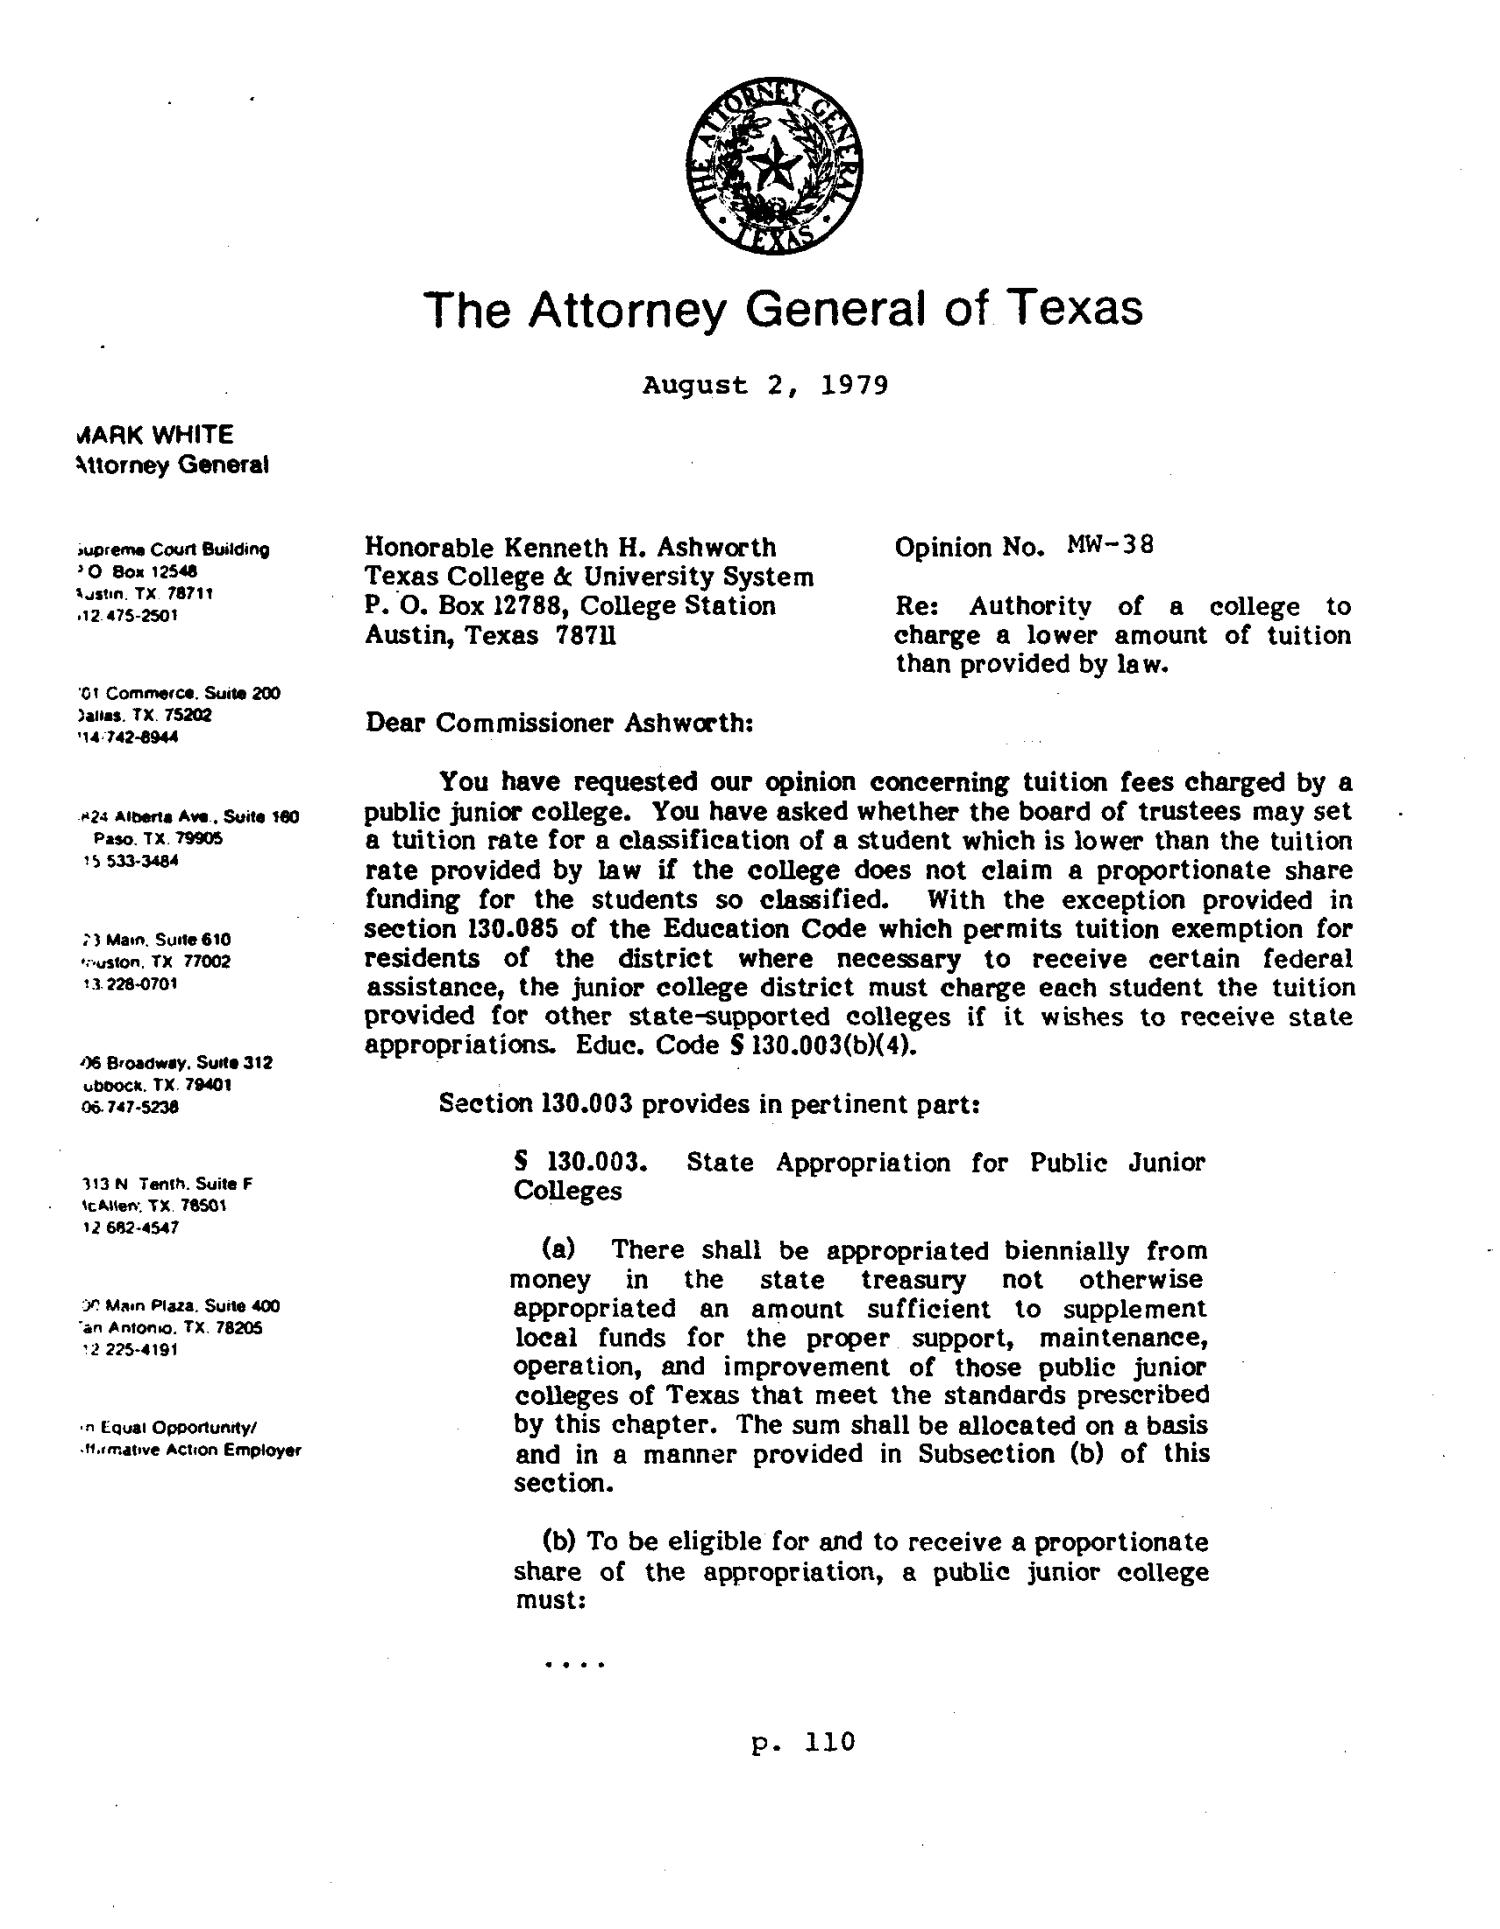 Texas Attorney General Opinion: MW-38
                                                
                                                    [Sequence #]: 1 of 3
                                                